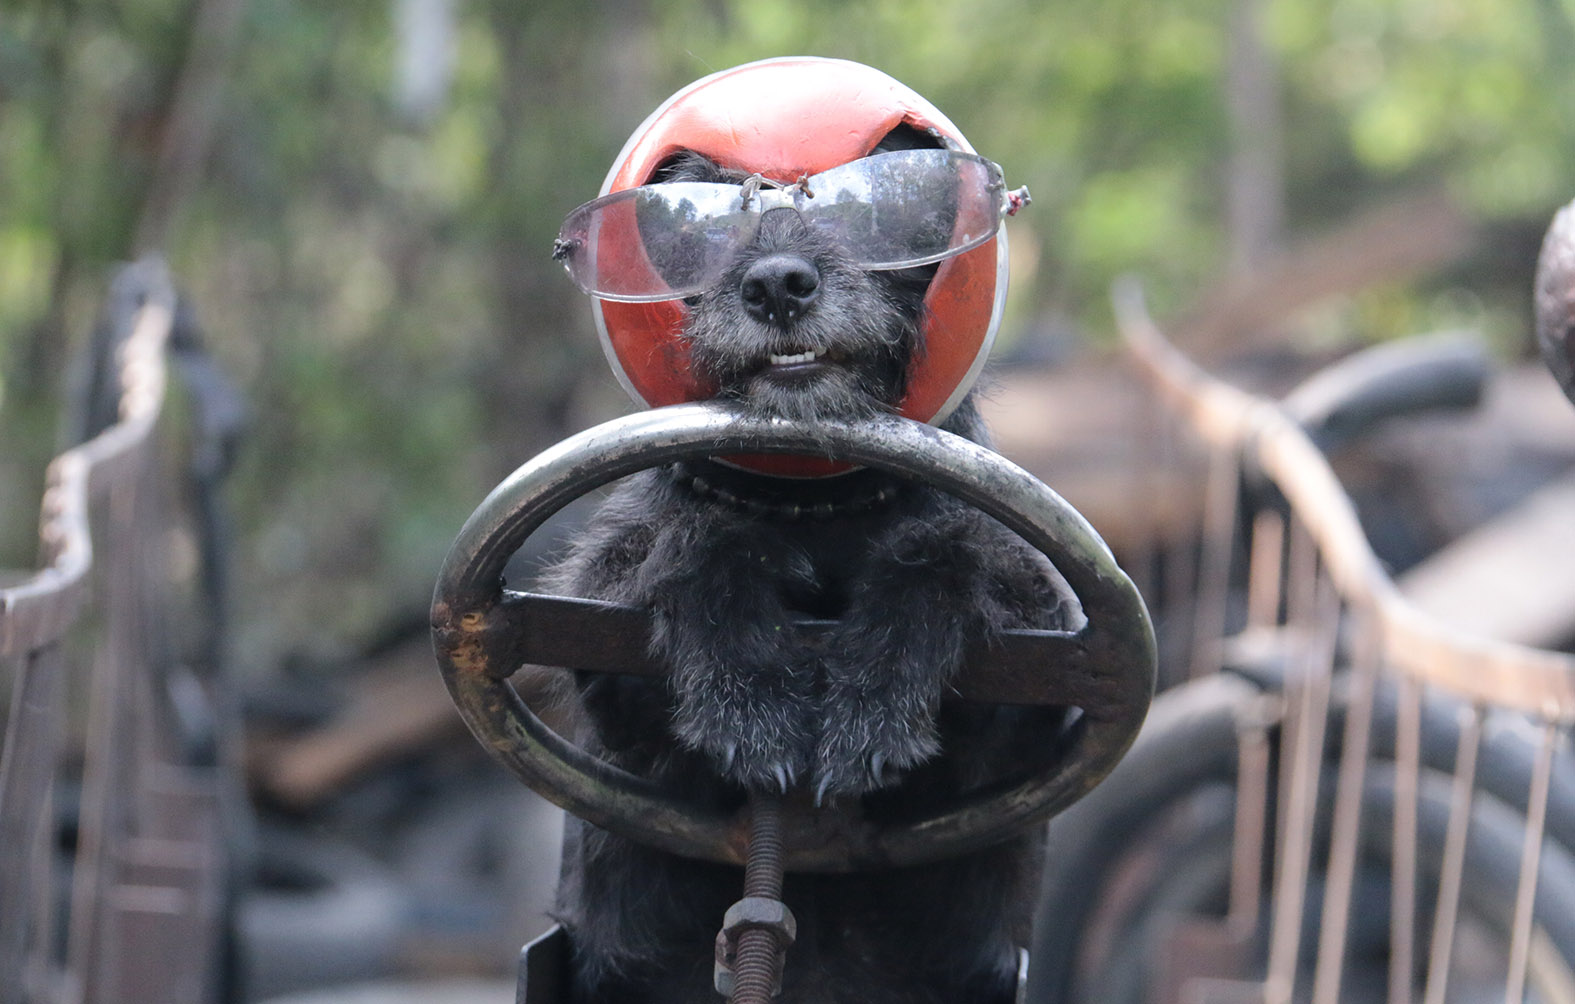 Nasan the poodle traded in his cap for a helmet when Sawang traded in his bicycle for a motorbike with sidecar and trailer.